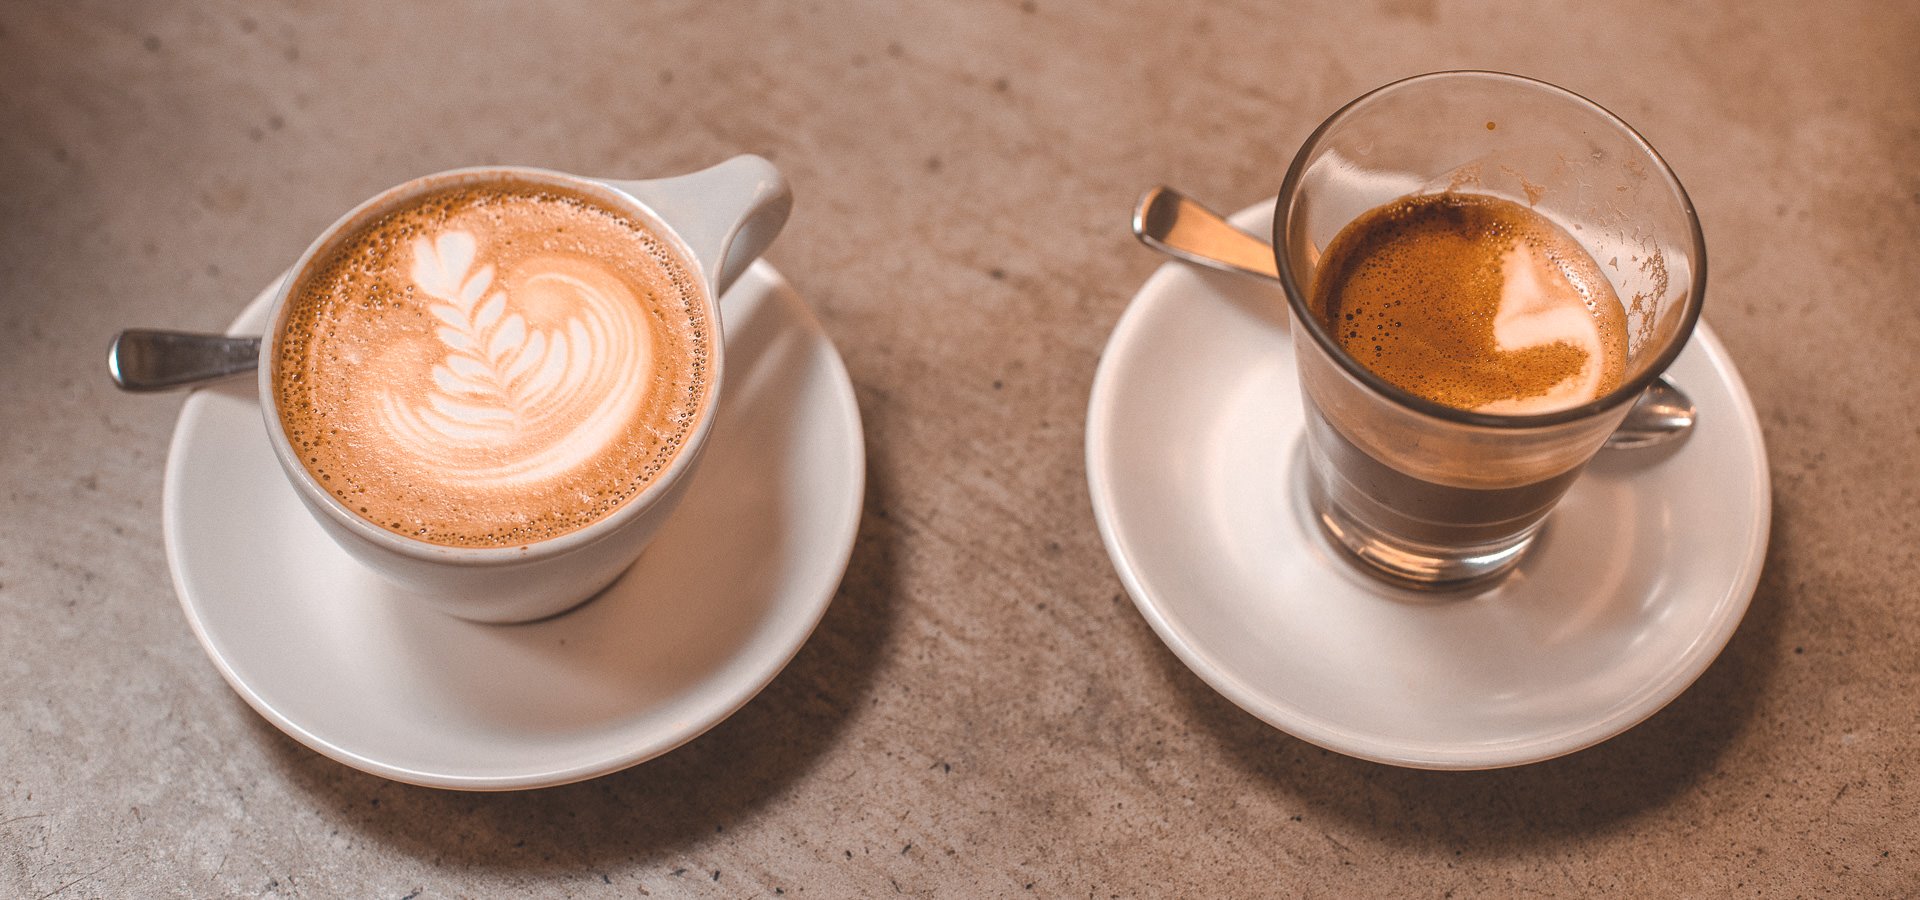 Where To Find The Best Coffee In Melbourne | byron bay travel guide 2